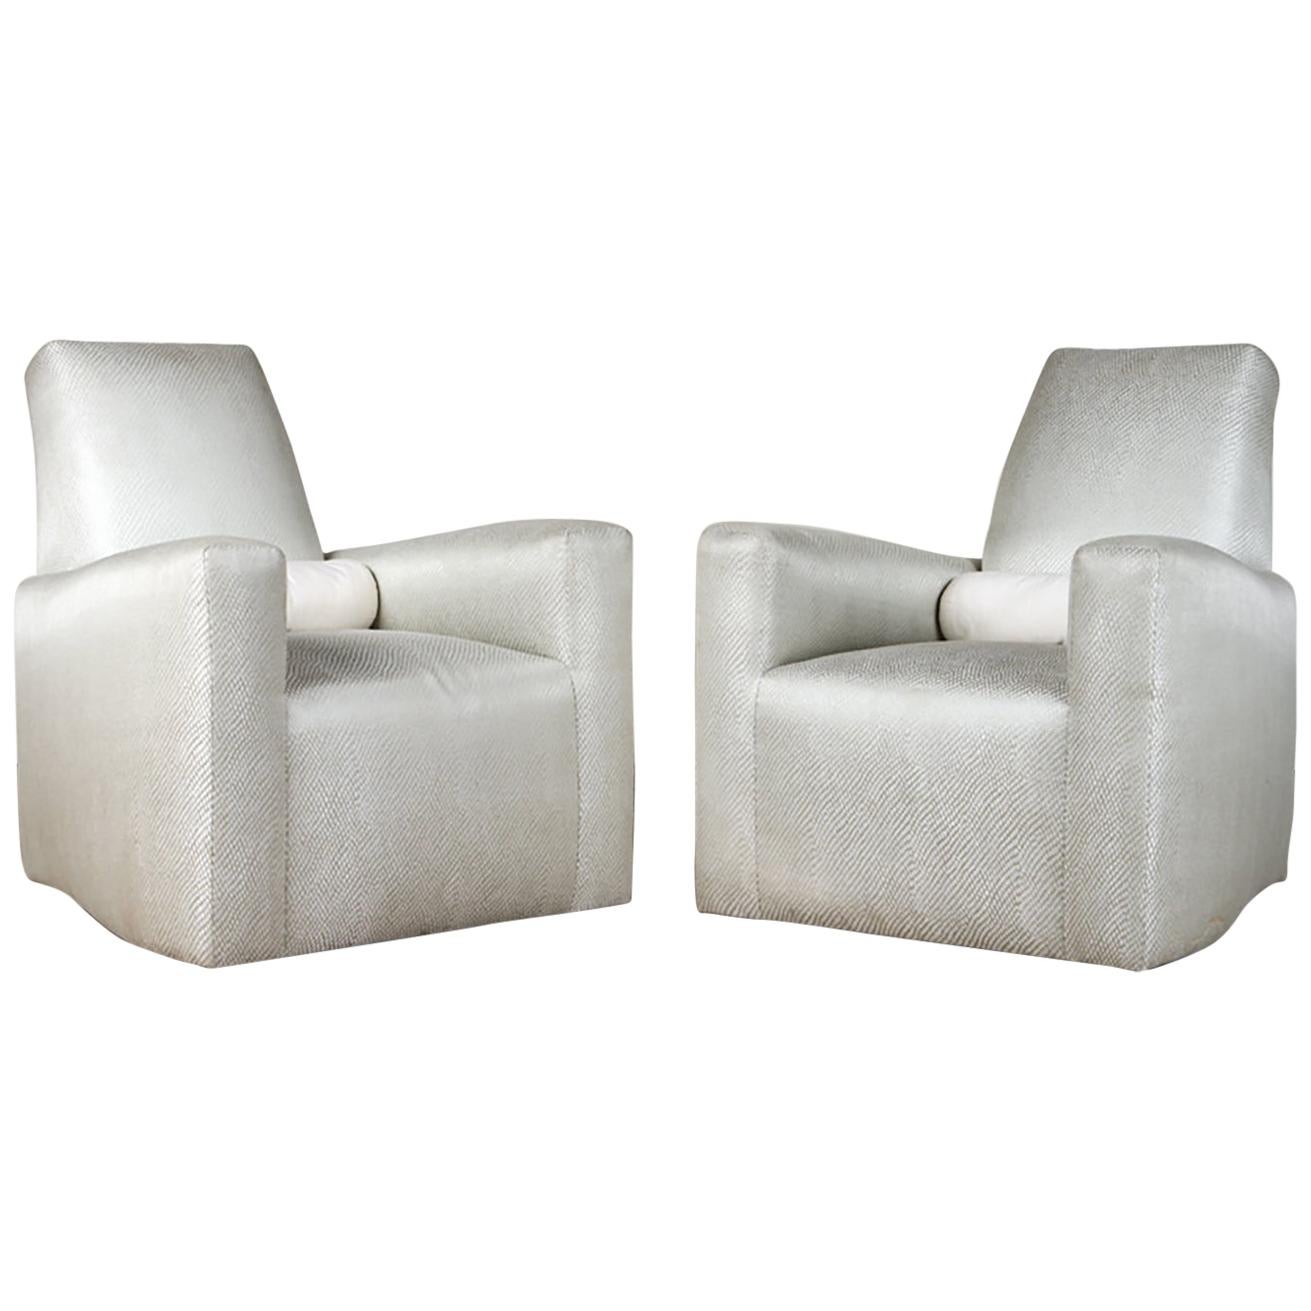 Stunning Pair of Geoffrey Bradfield Custom Club Chairs in a Woven Silver Fabric For Sale